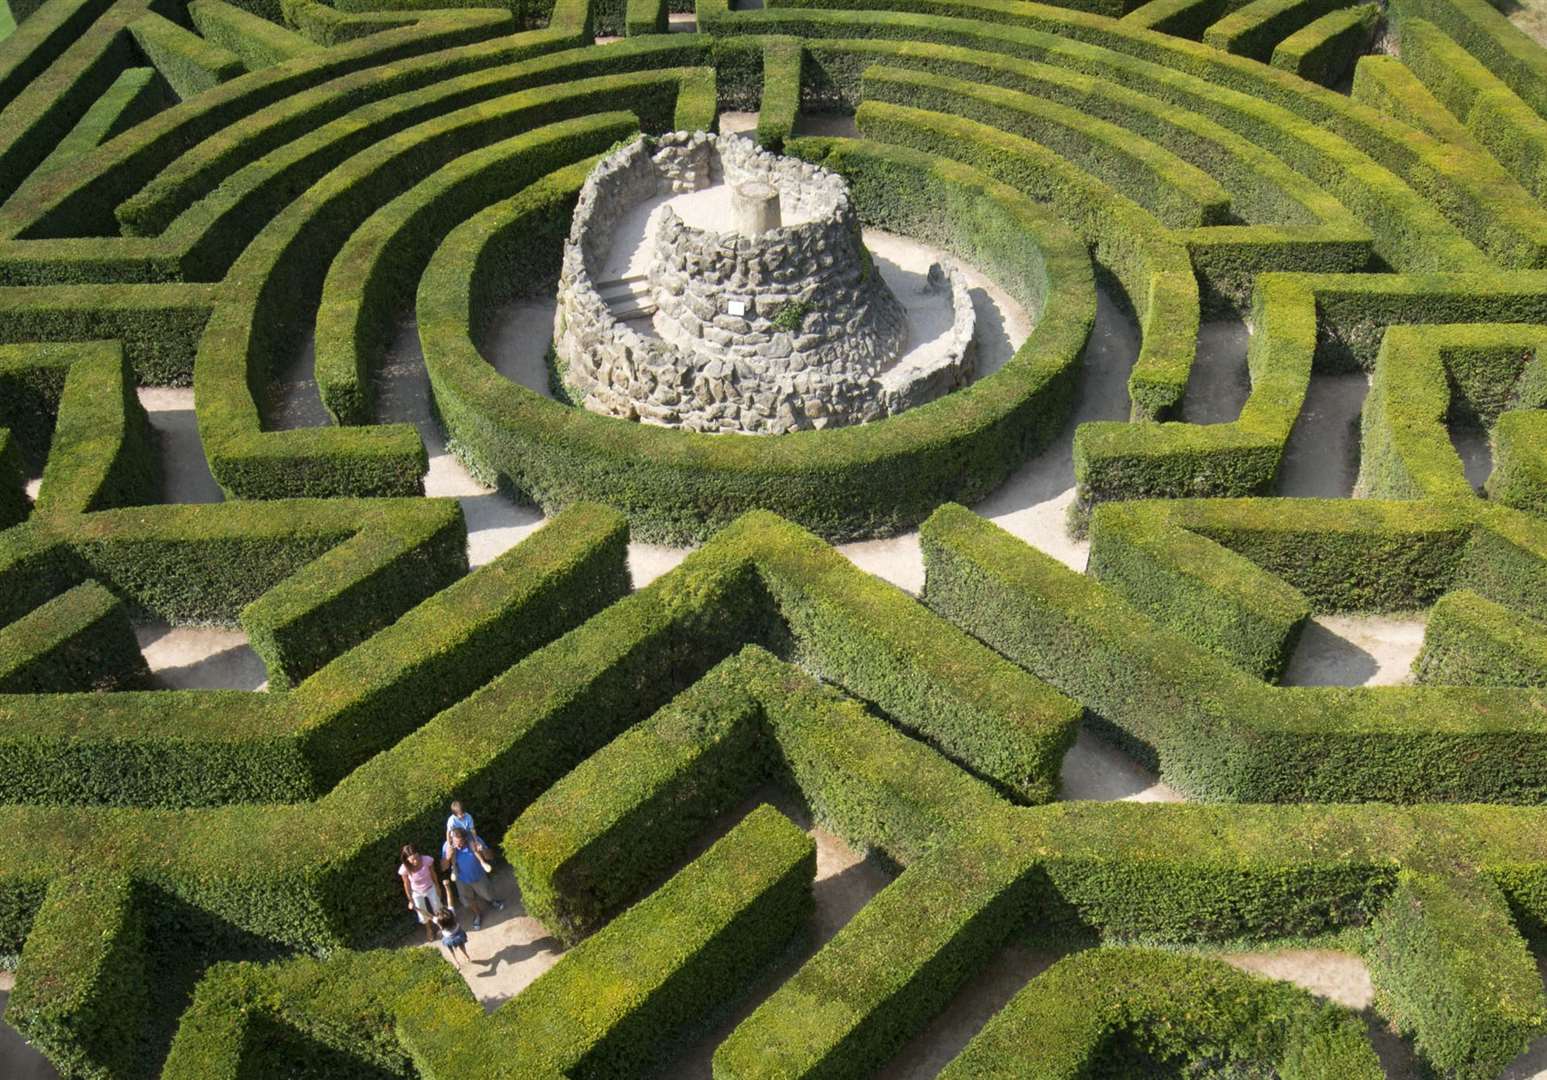 Enjoy a fun family day out at Leeds Castle, including the tricky maze. Picture: Pete Seaward